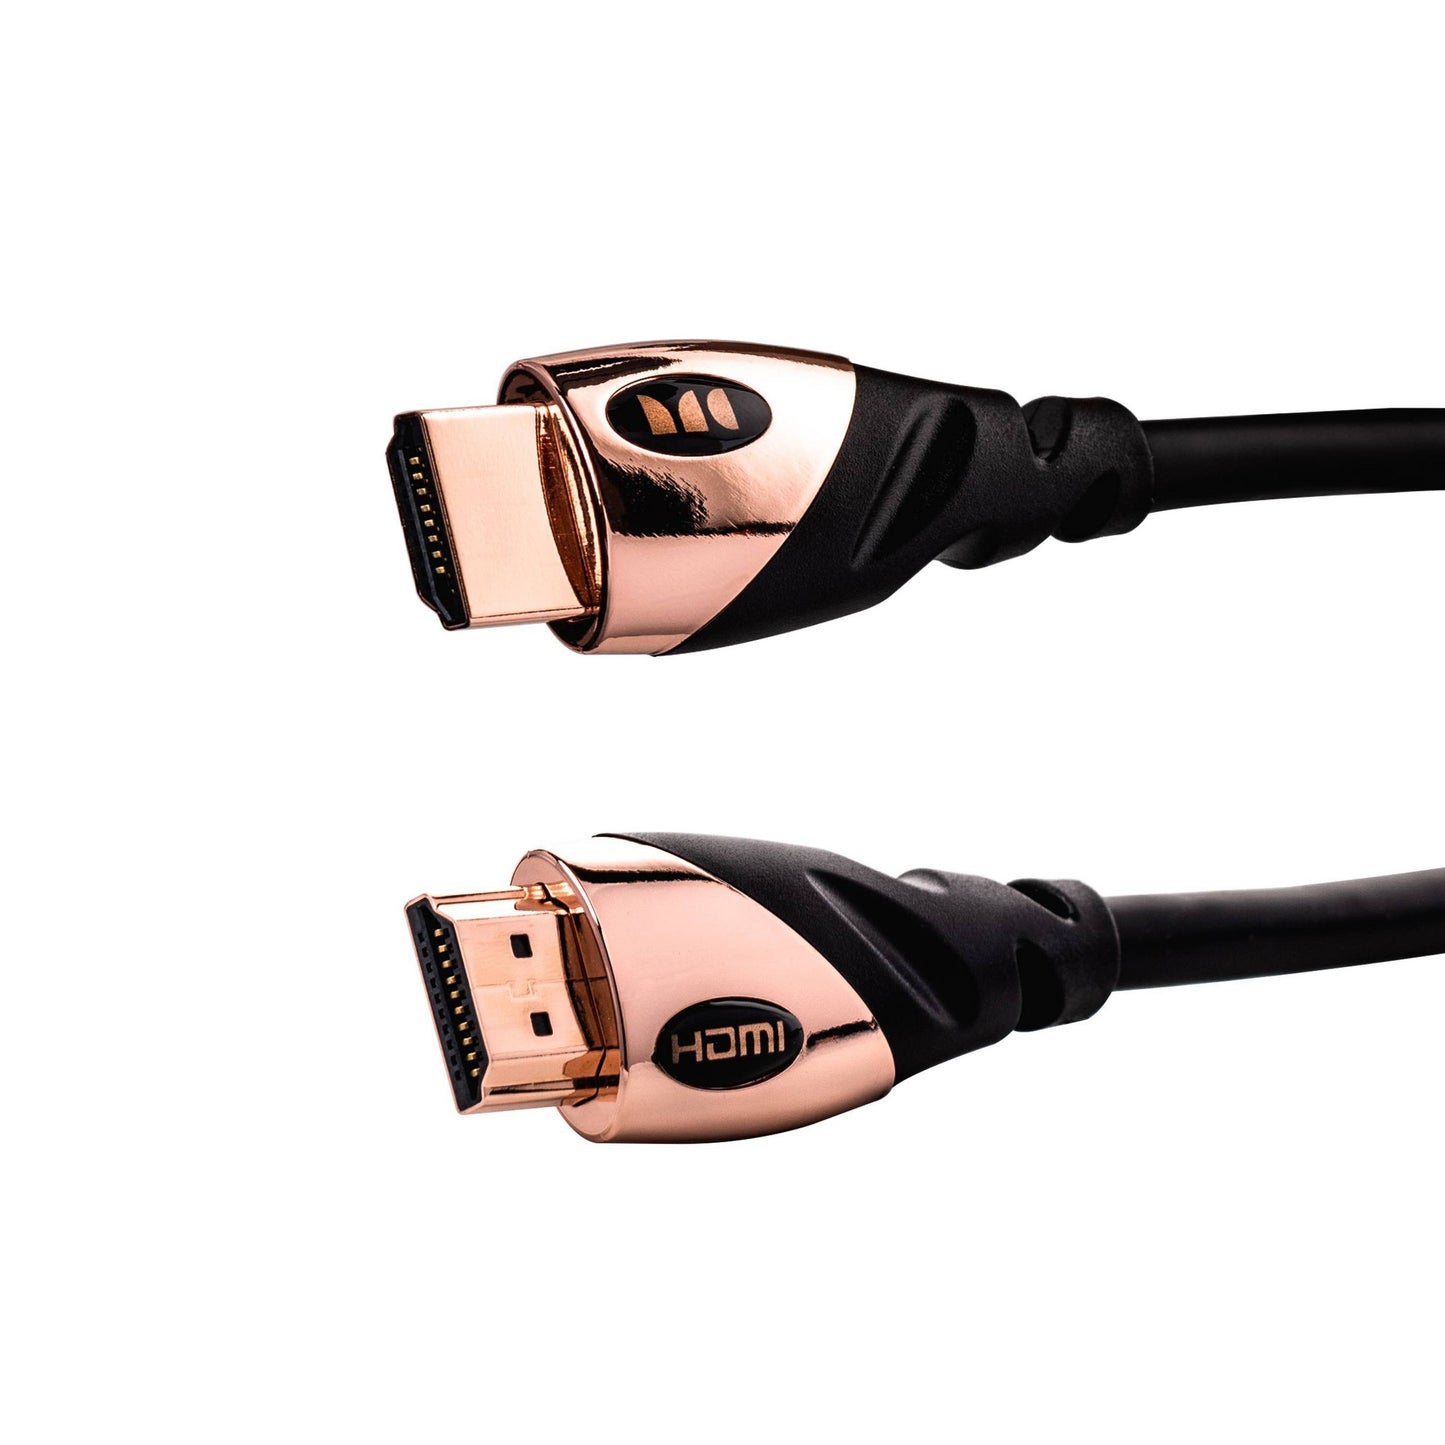 HDMI cable for watching 4K UHD videos from MONSTER, size 3.65 m